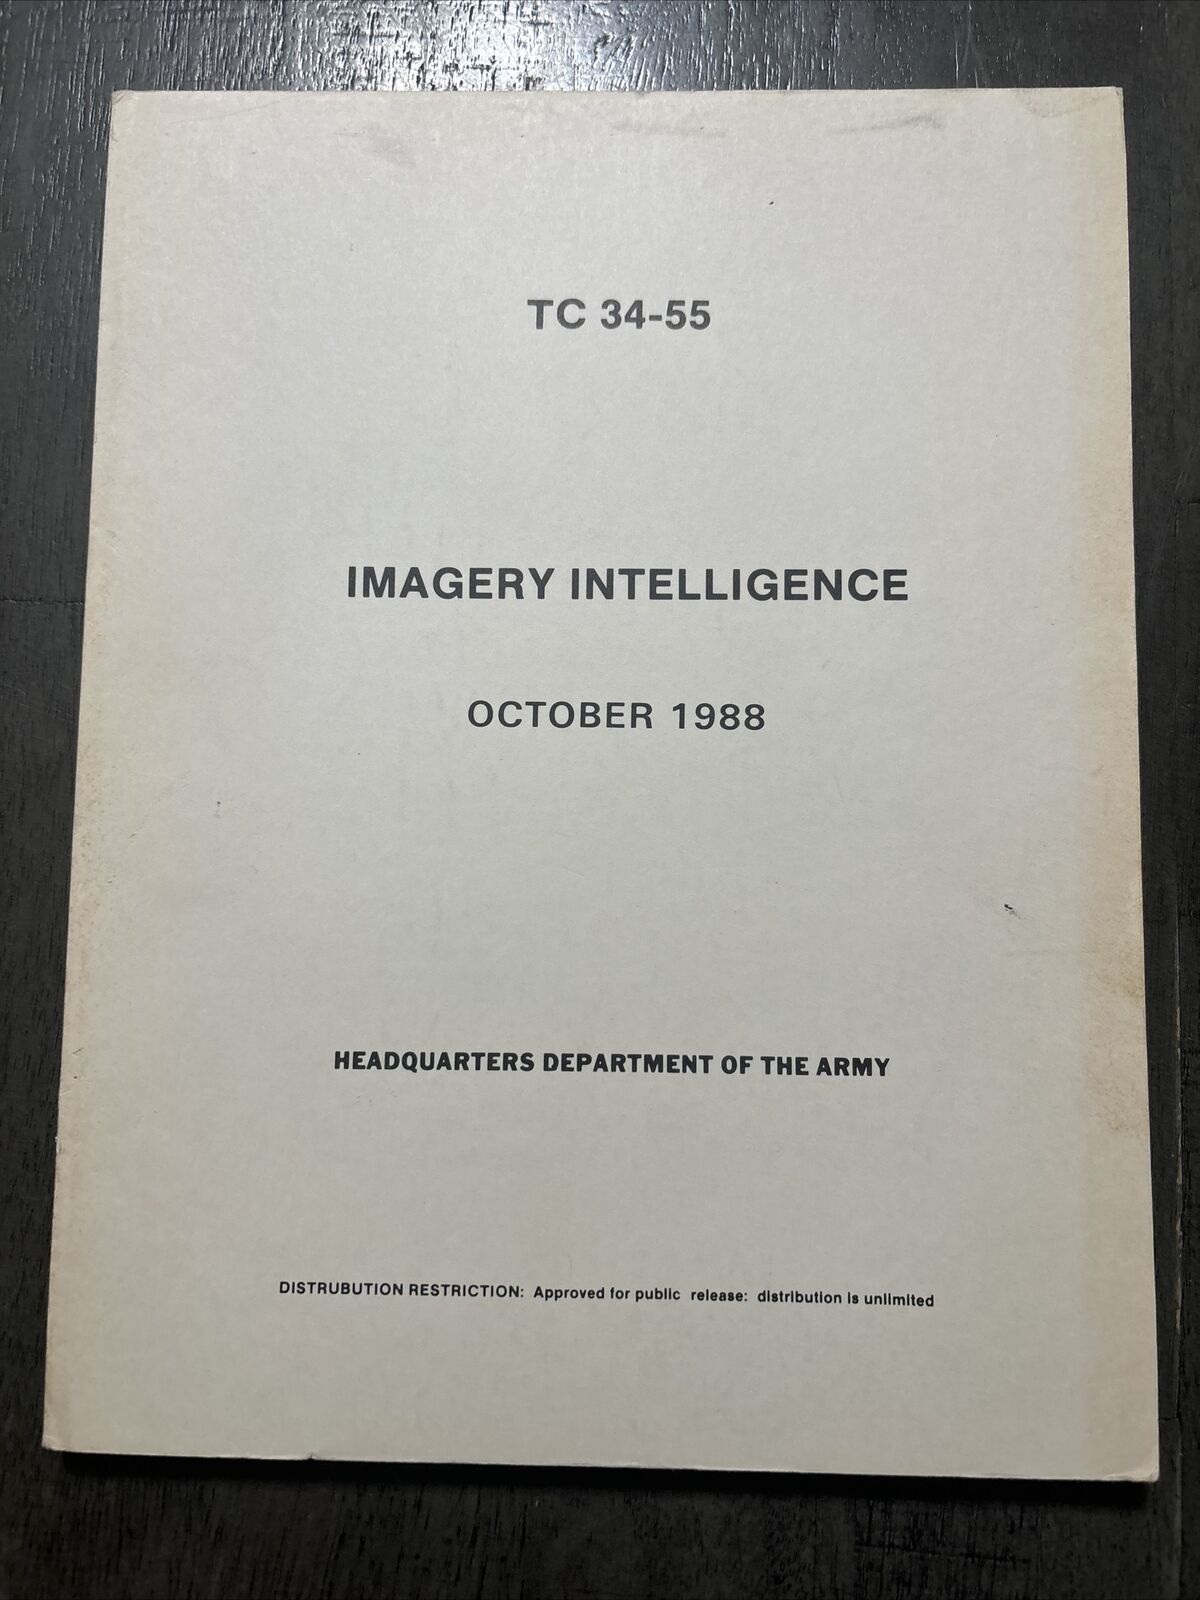 US Department of the Army Imagery Intelligence Manual  TC 34-55 1988